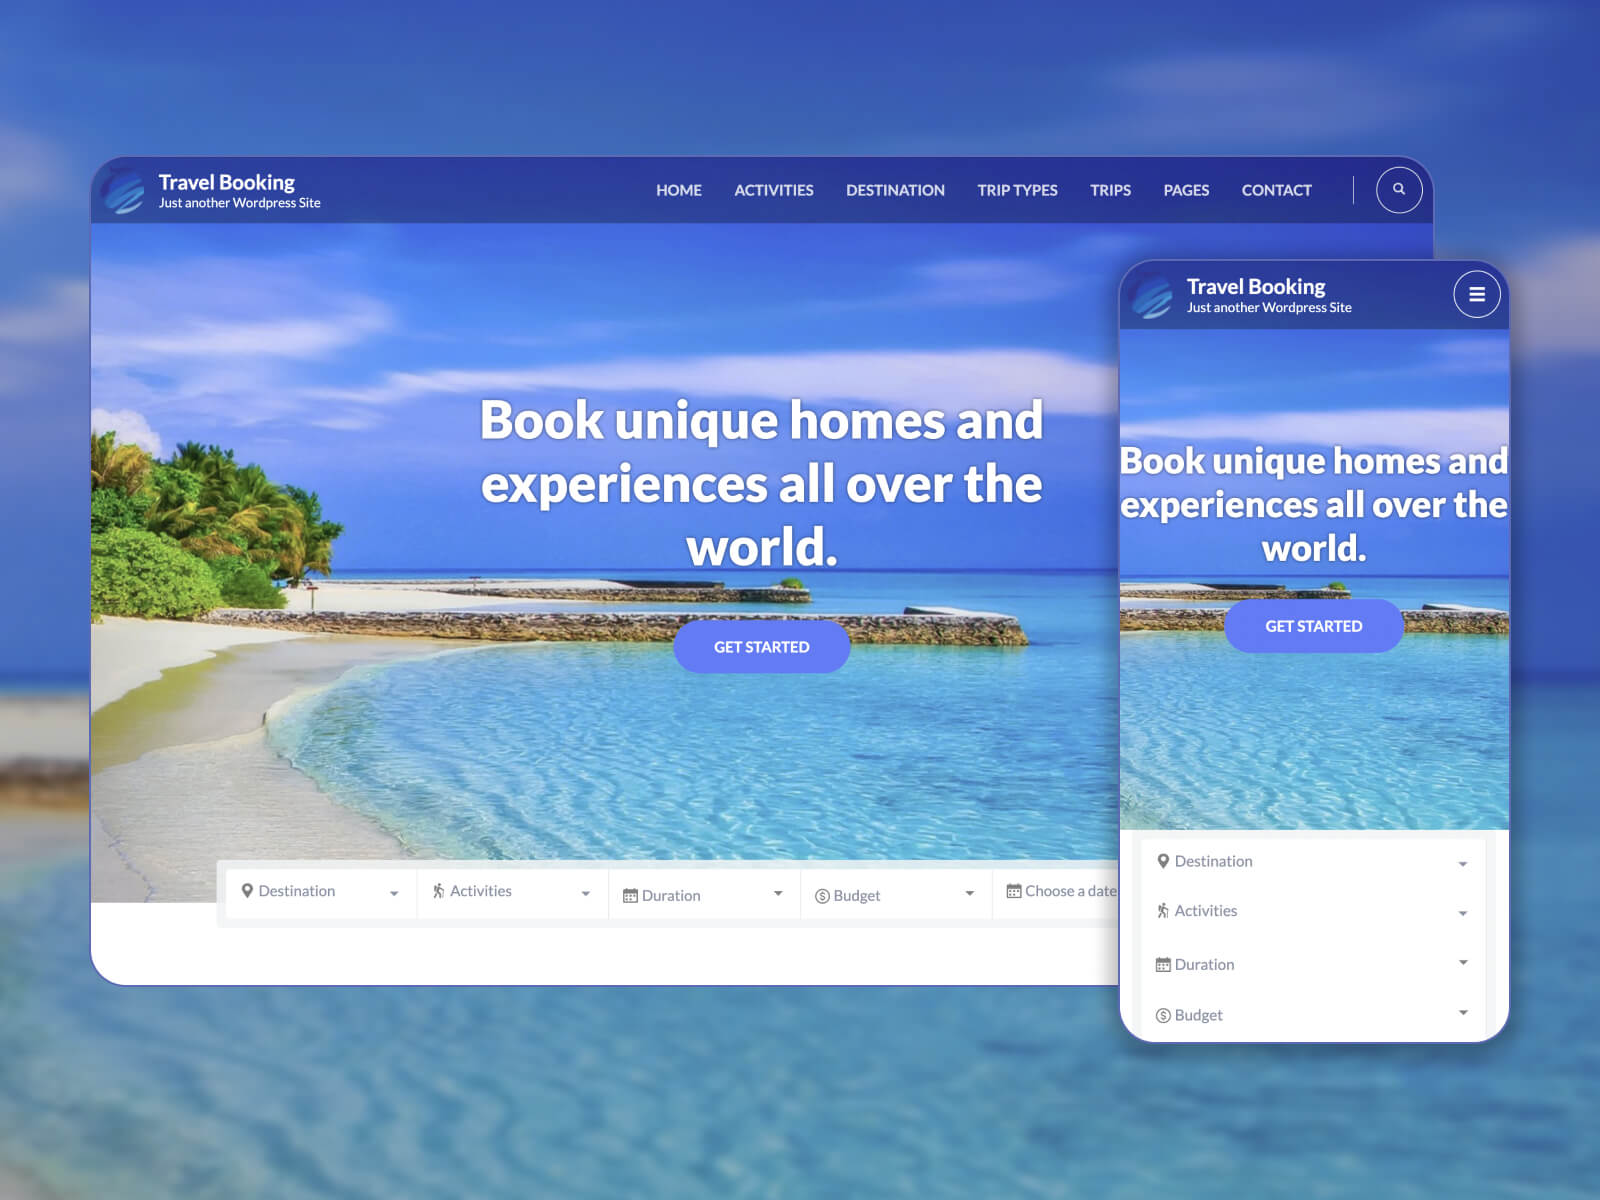 Photo of Travel Booking - versatile WordPress theme for reservation platforms in cornflowerblue, dimgray, steelblue, snow, and lightsteelblue hues